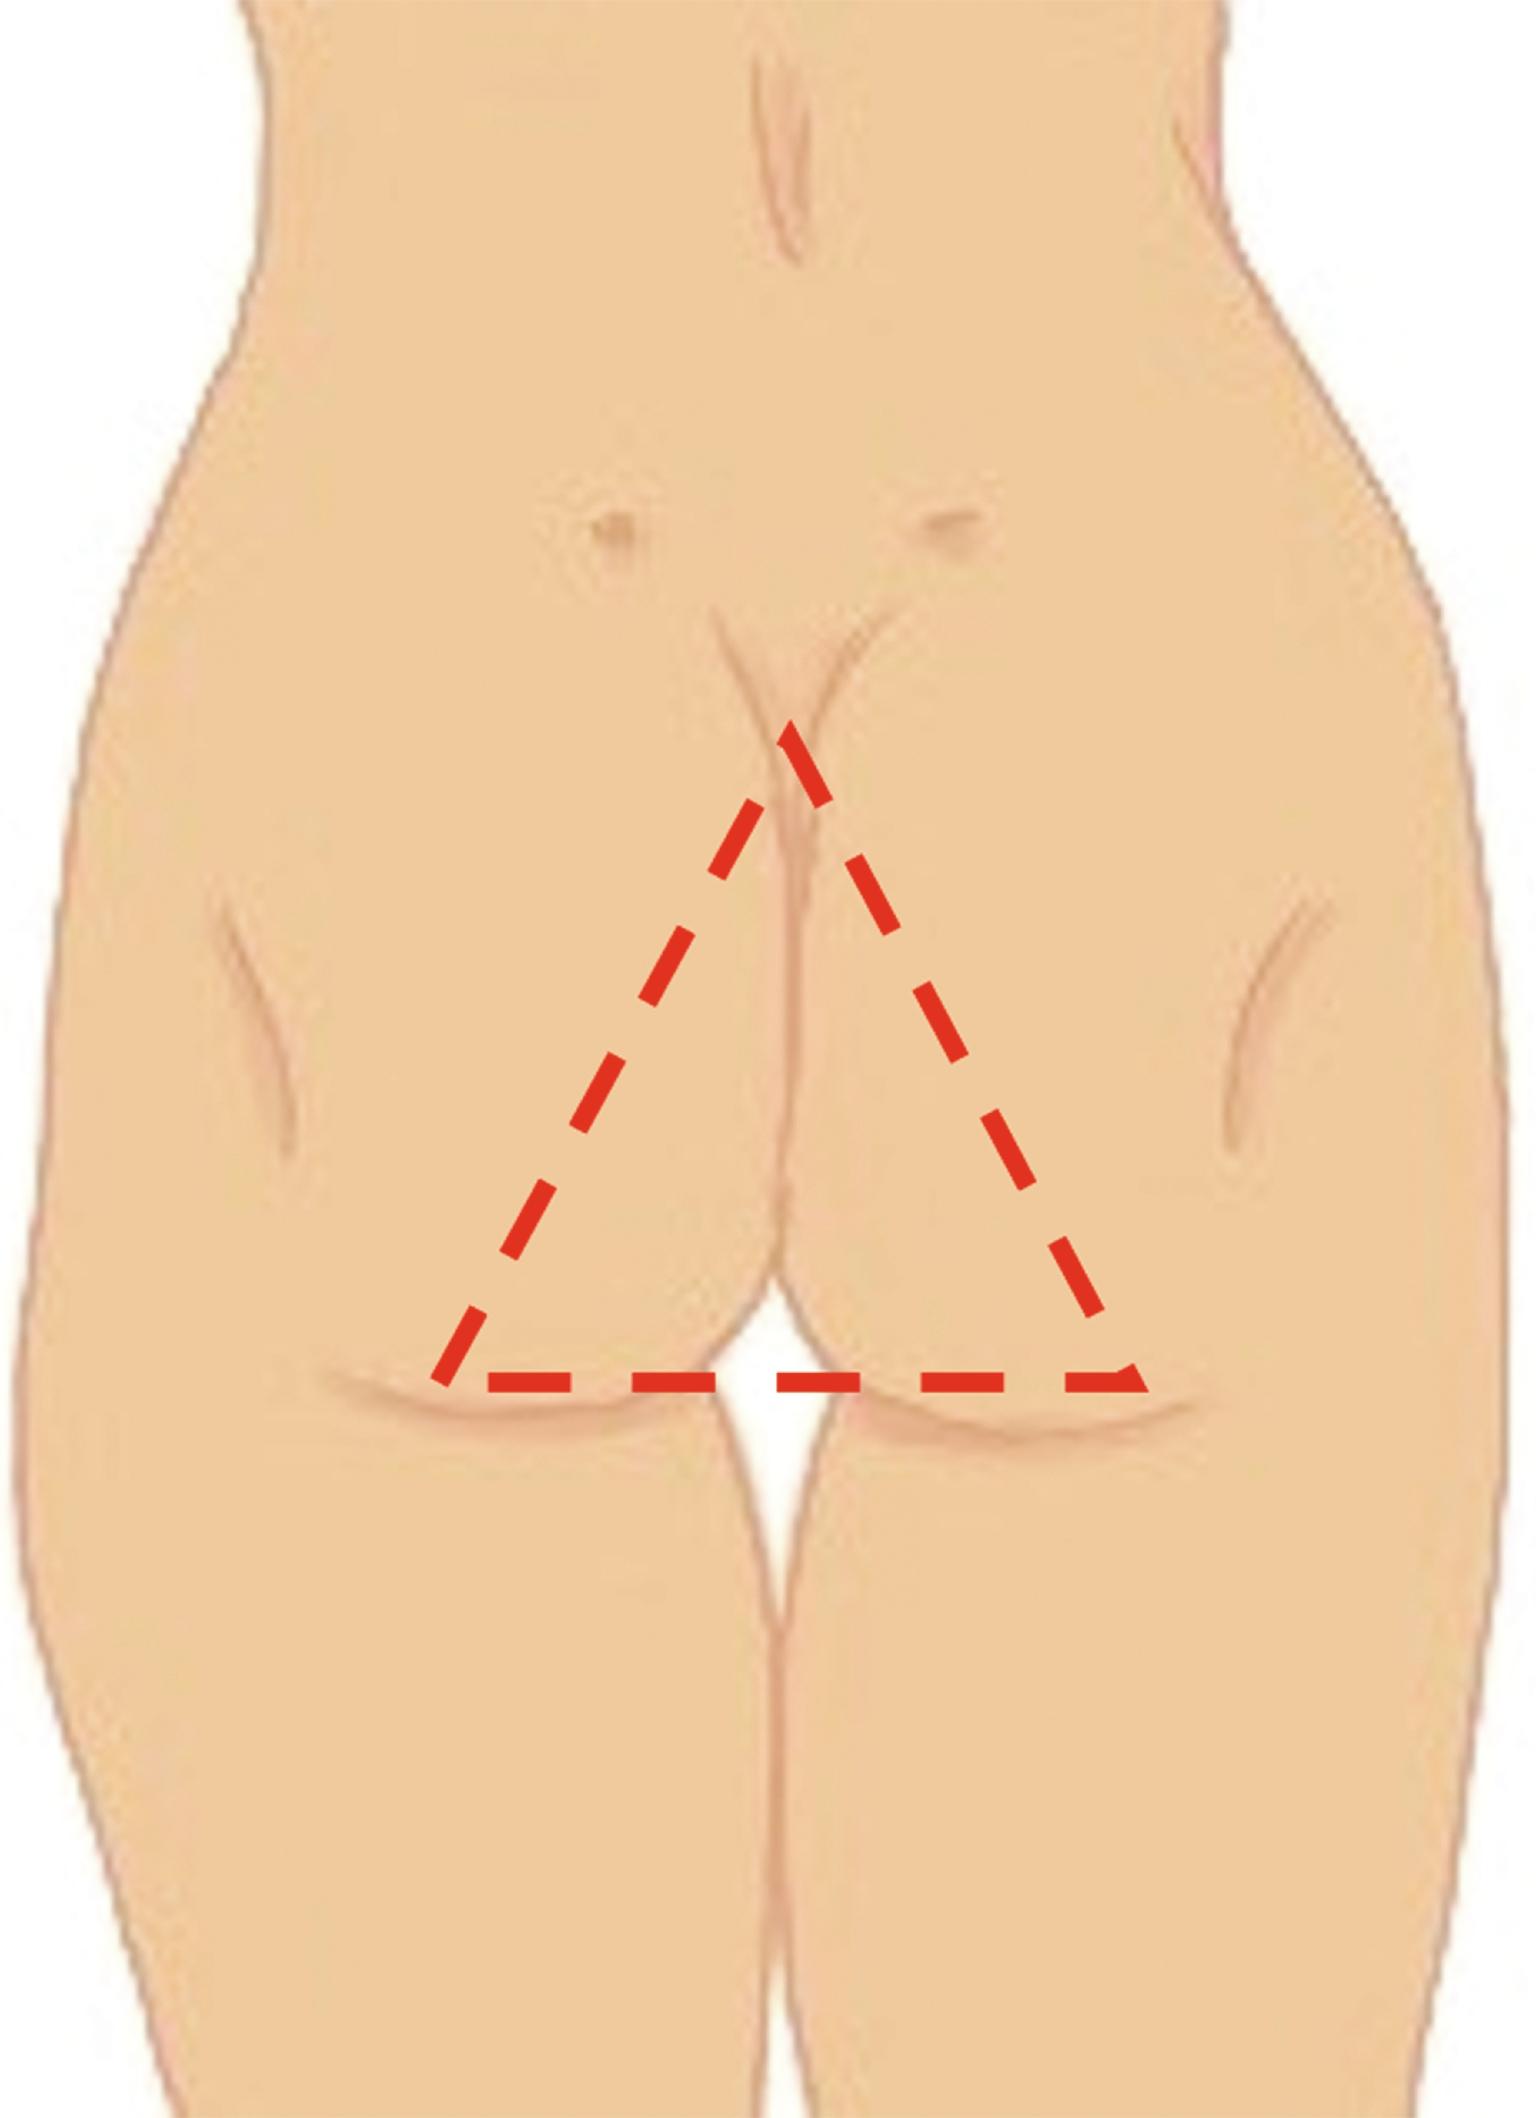 Fig. 29.2, “Danger area”: triangle with apex in the intergluteal cleft and base in the medial and lower one third of the buttocks.